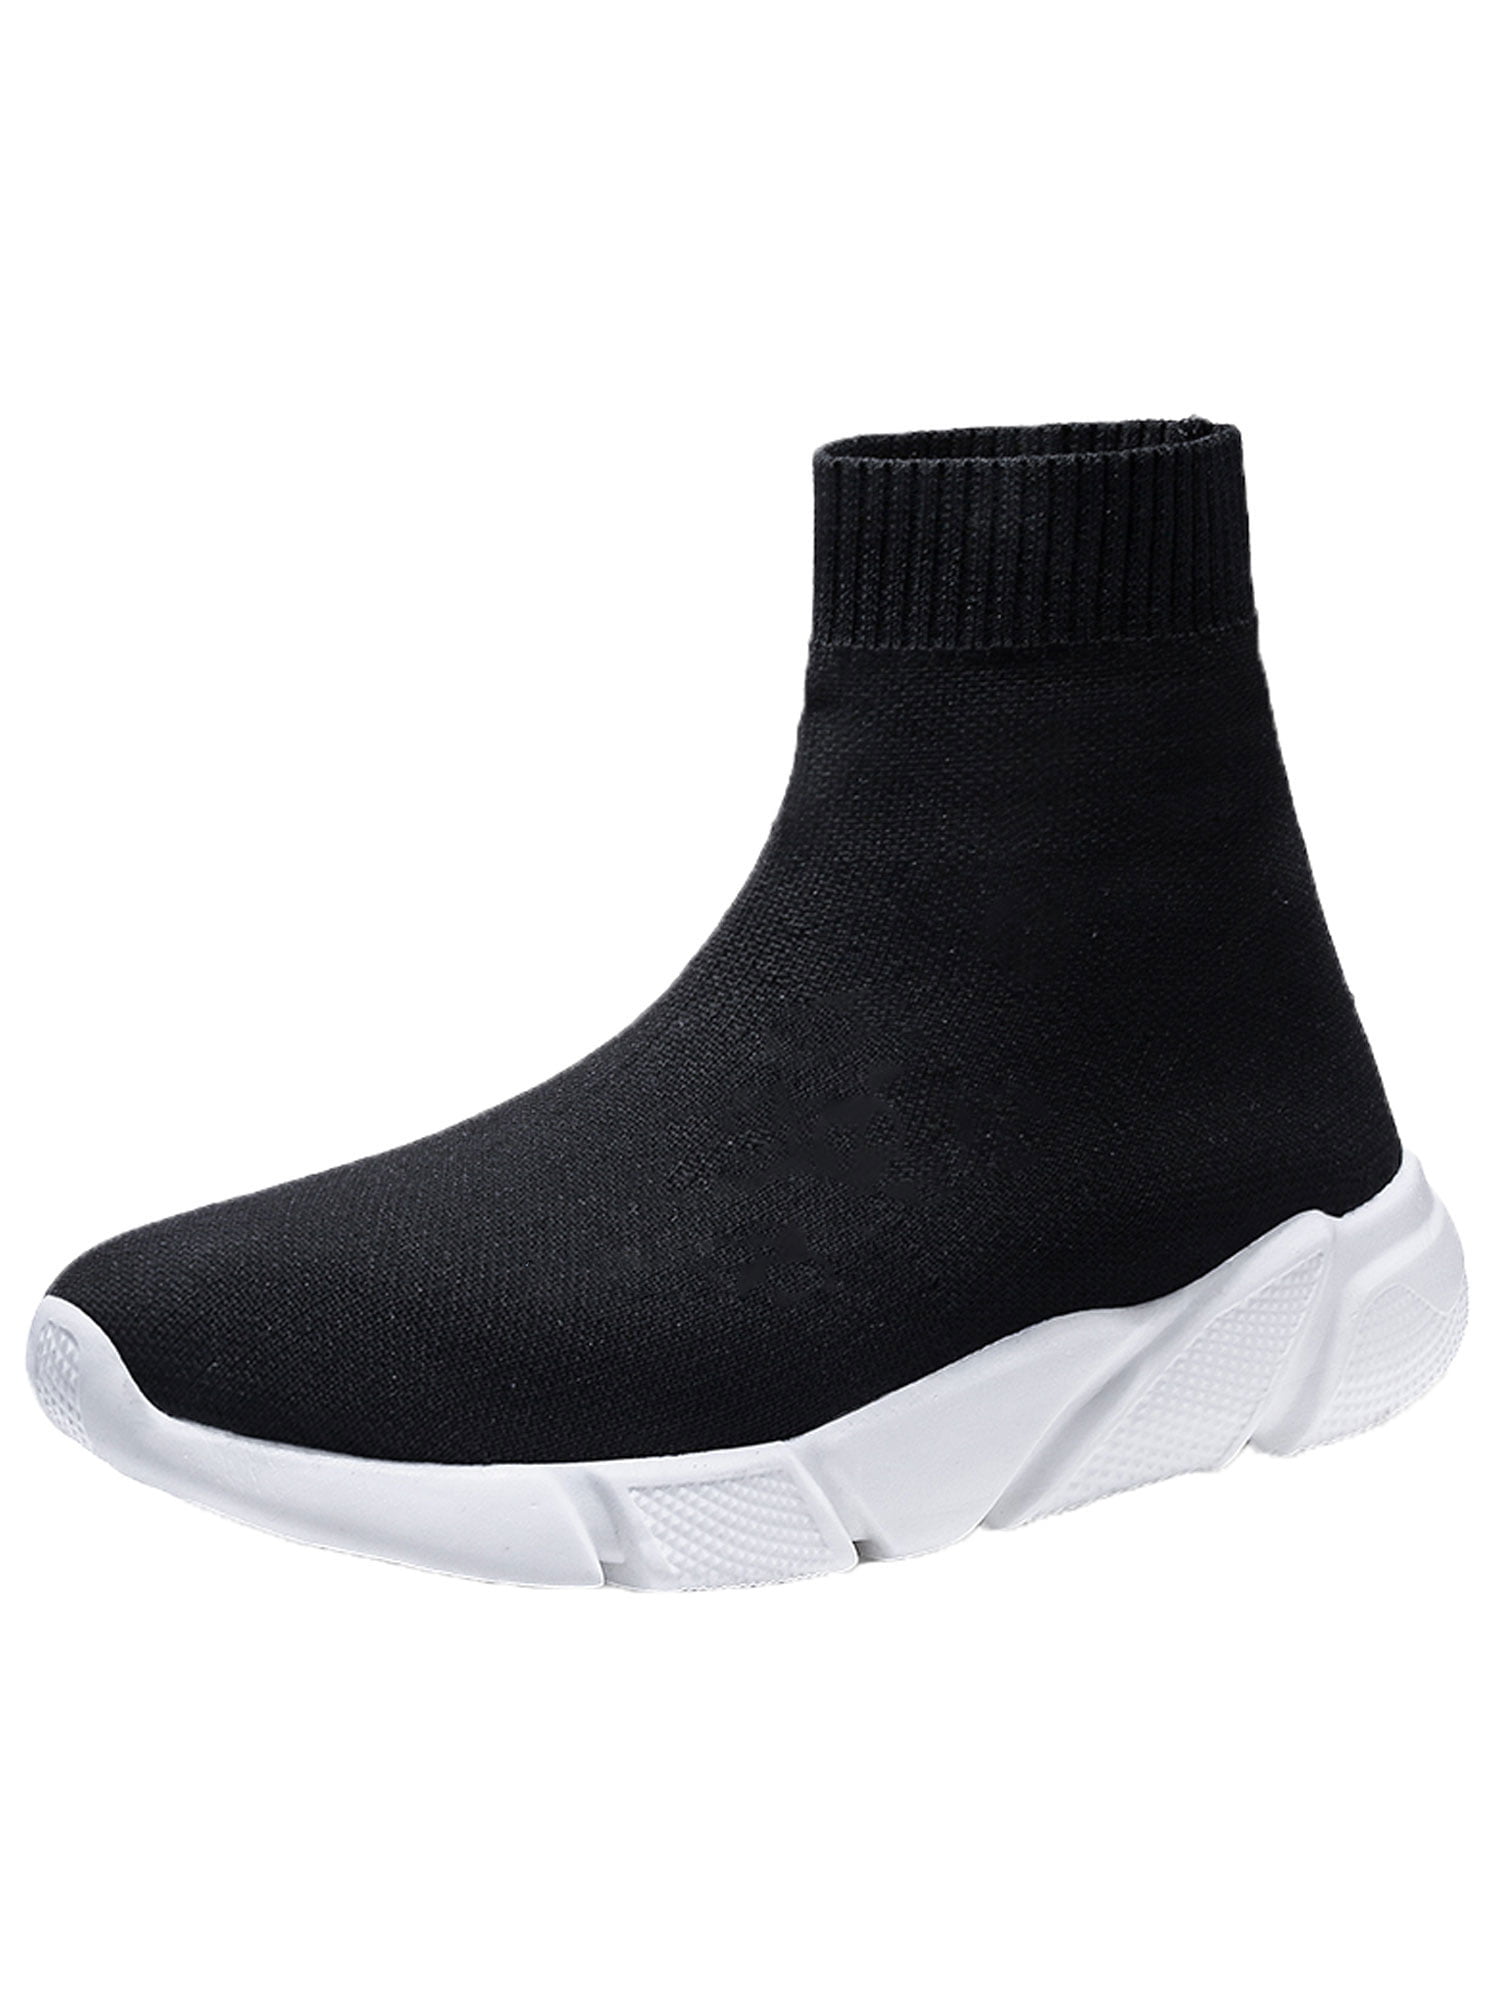 Men Breathable Running Sneakers Outdoor Shoes Walking Casual Sock Shoes Fashion 